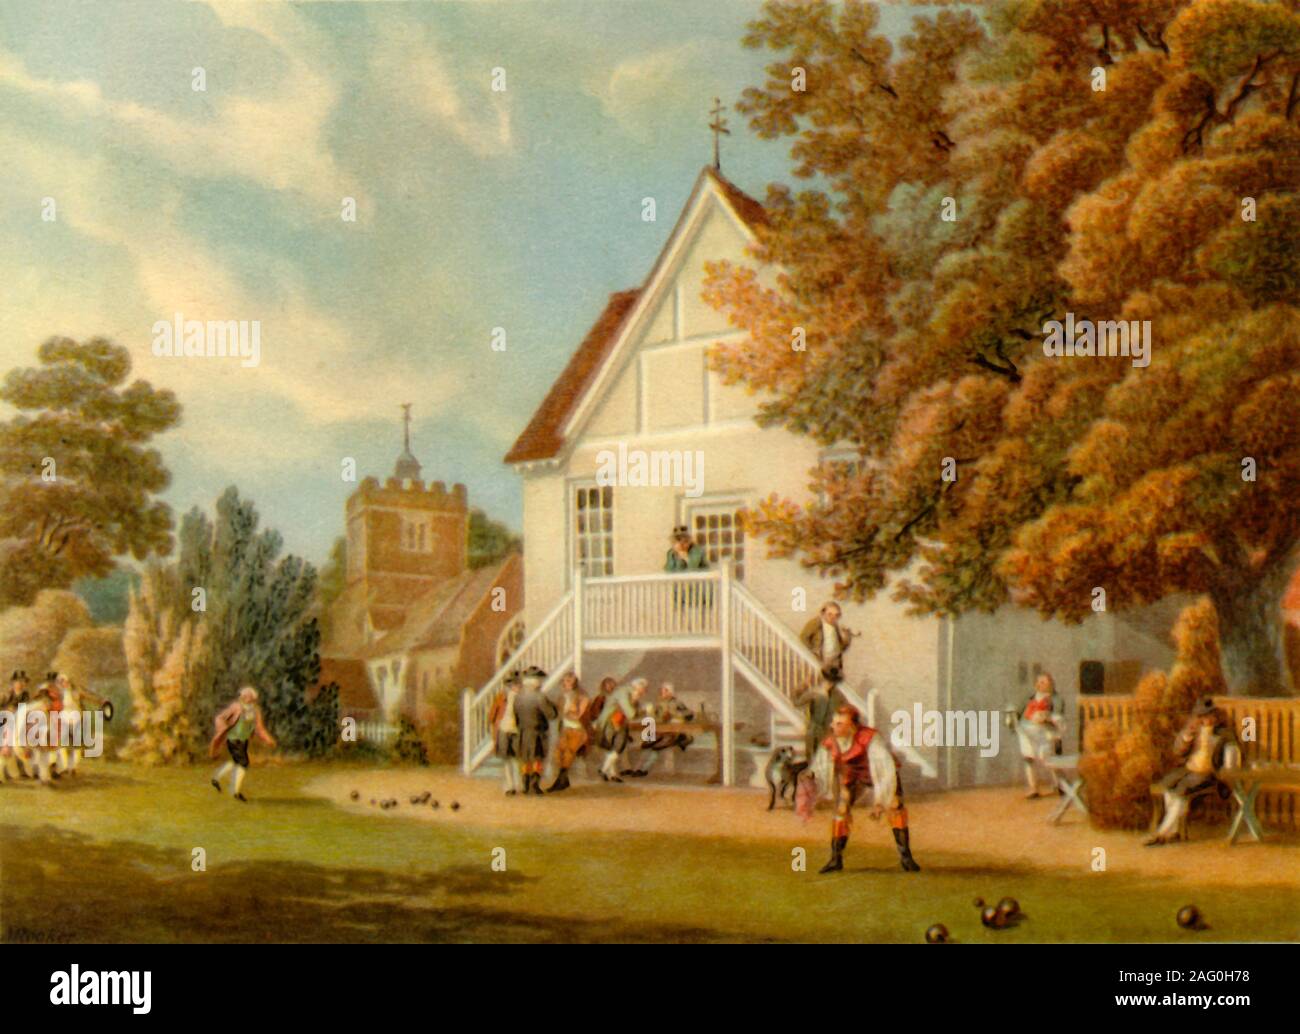 'The Bowling Green', late 18th century, (1941). A game of lawn bowls on Hurst Bowling Green in Berkshire. The first documented date for the Hurst Bowling Club is 1747. The building in the centre was known as the Church House. It later became the Bunch of Grapes public house. From &quot;British Sport&quot;, by Eric Parker. [Collins, London, 1941] Stock Photo